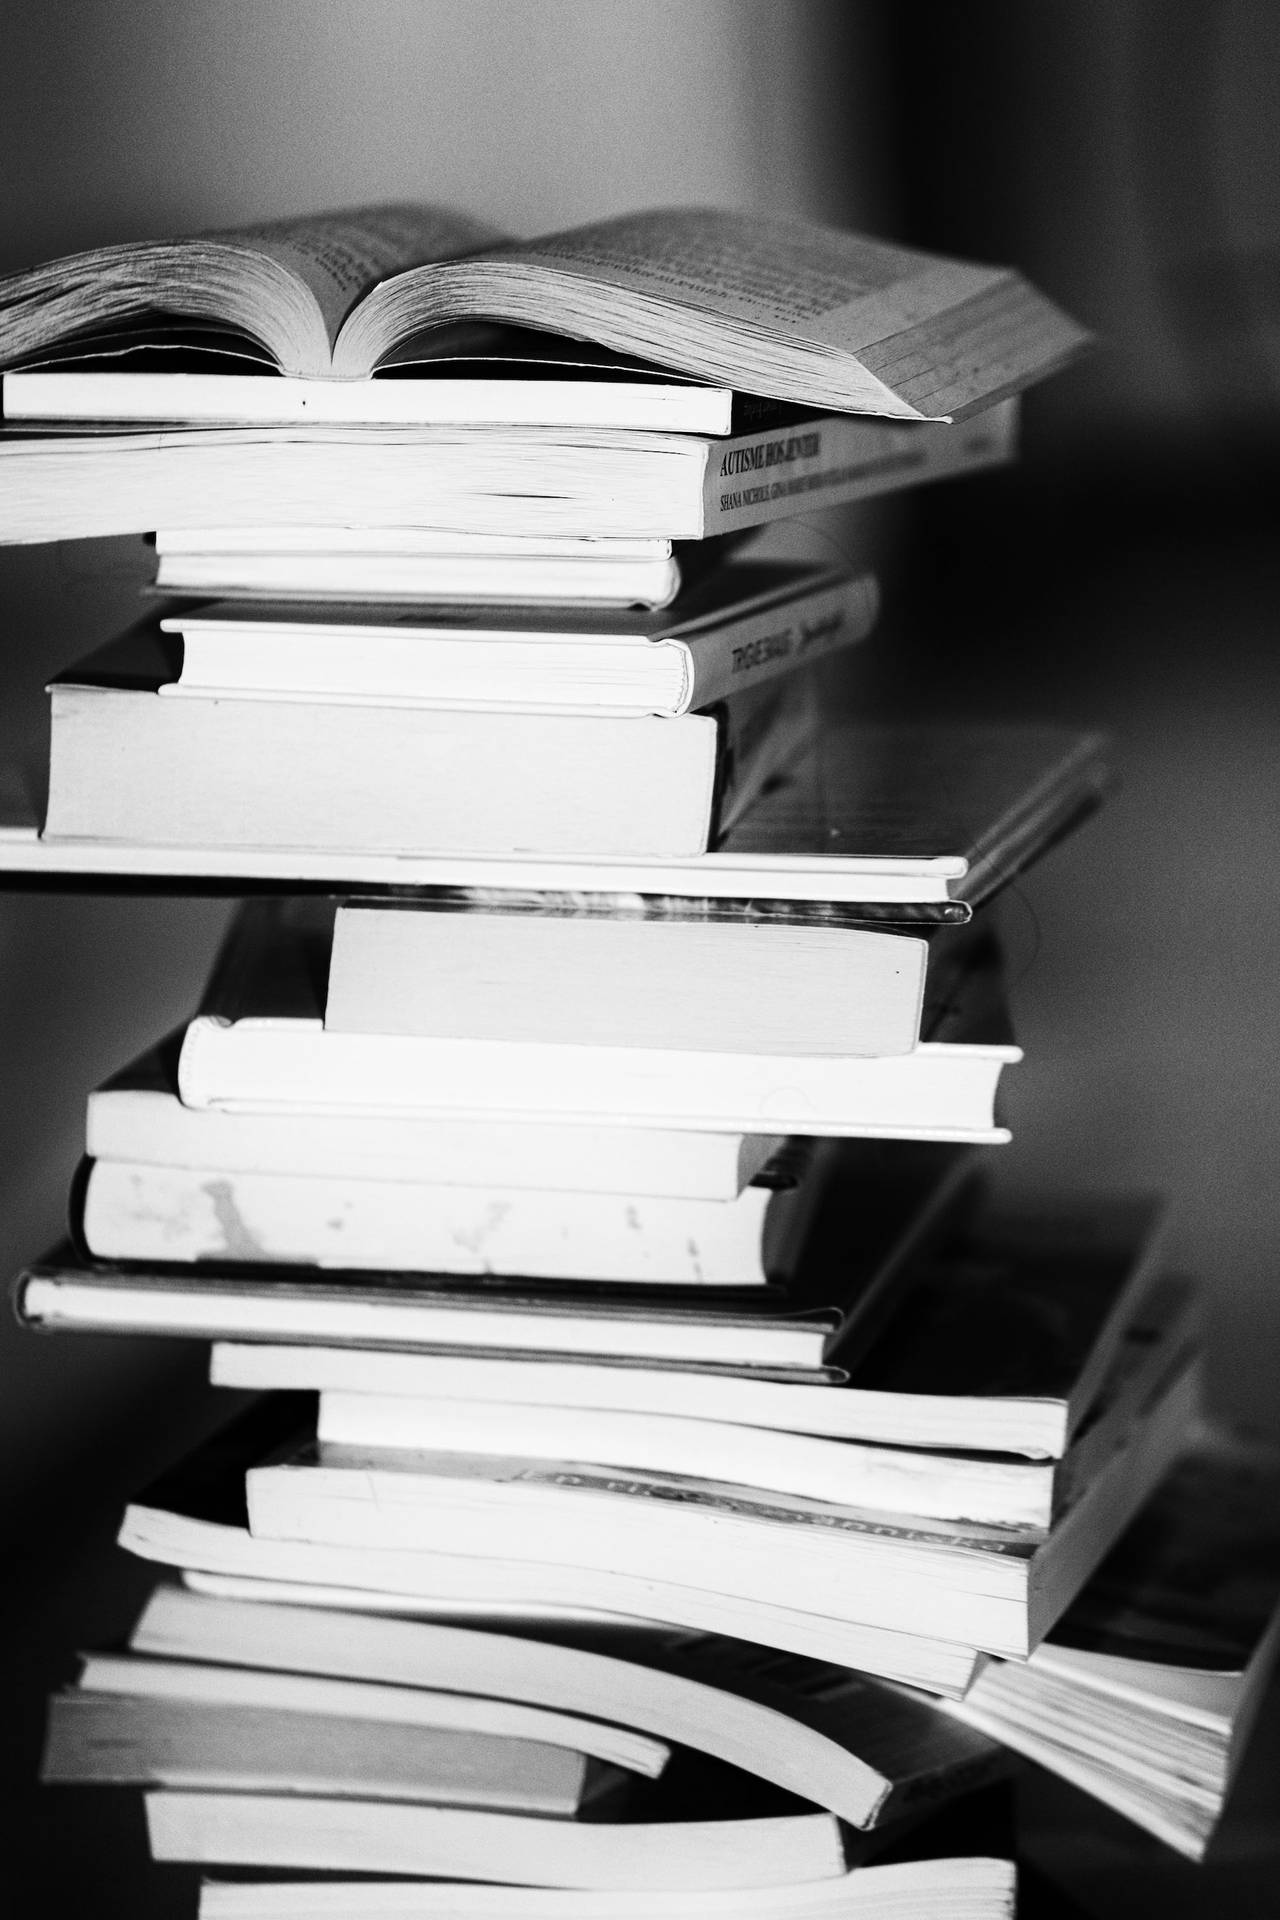 Greyscale Photo Of A Pile Of Books